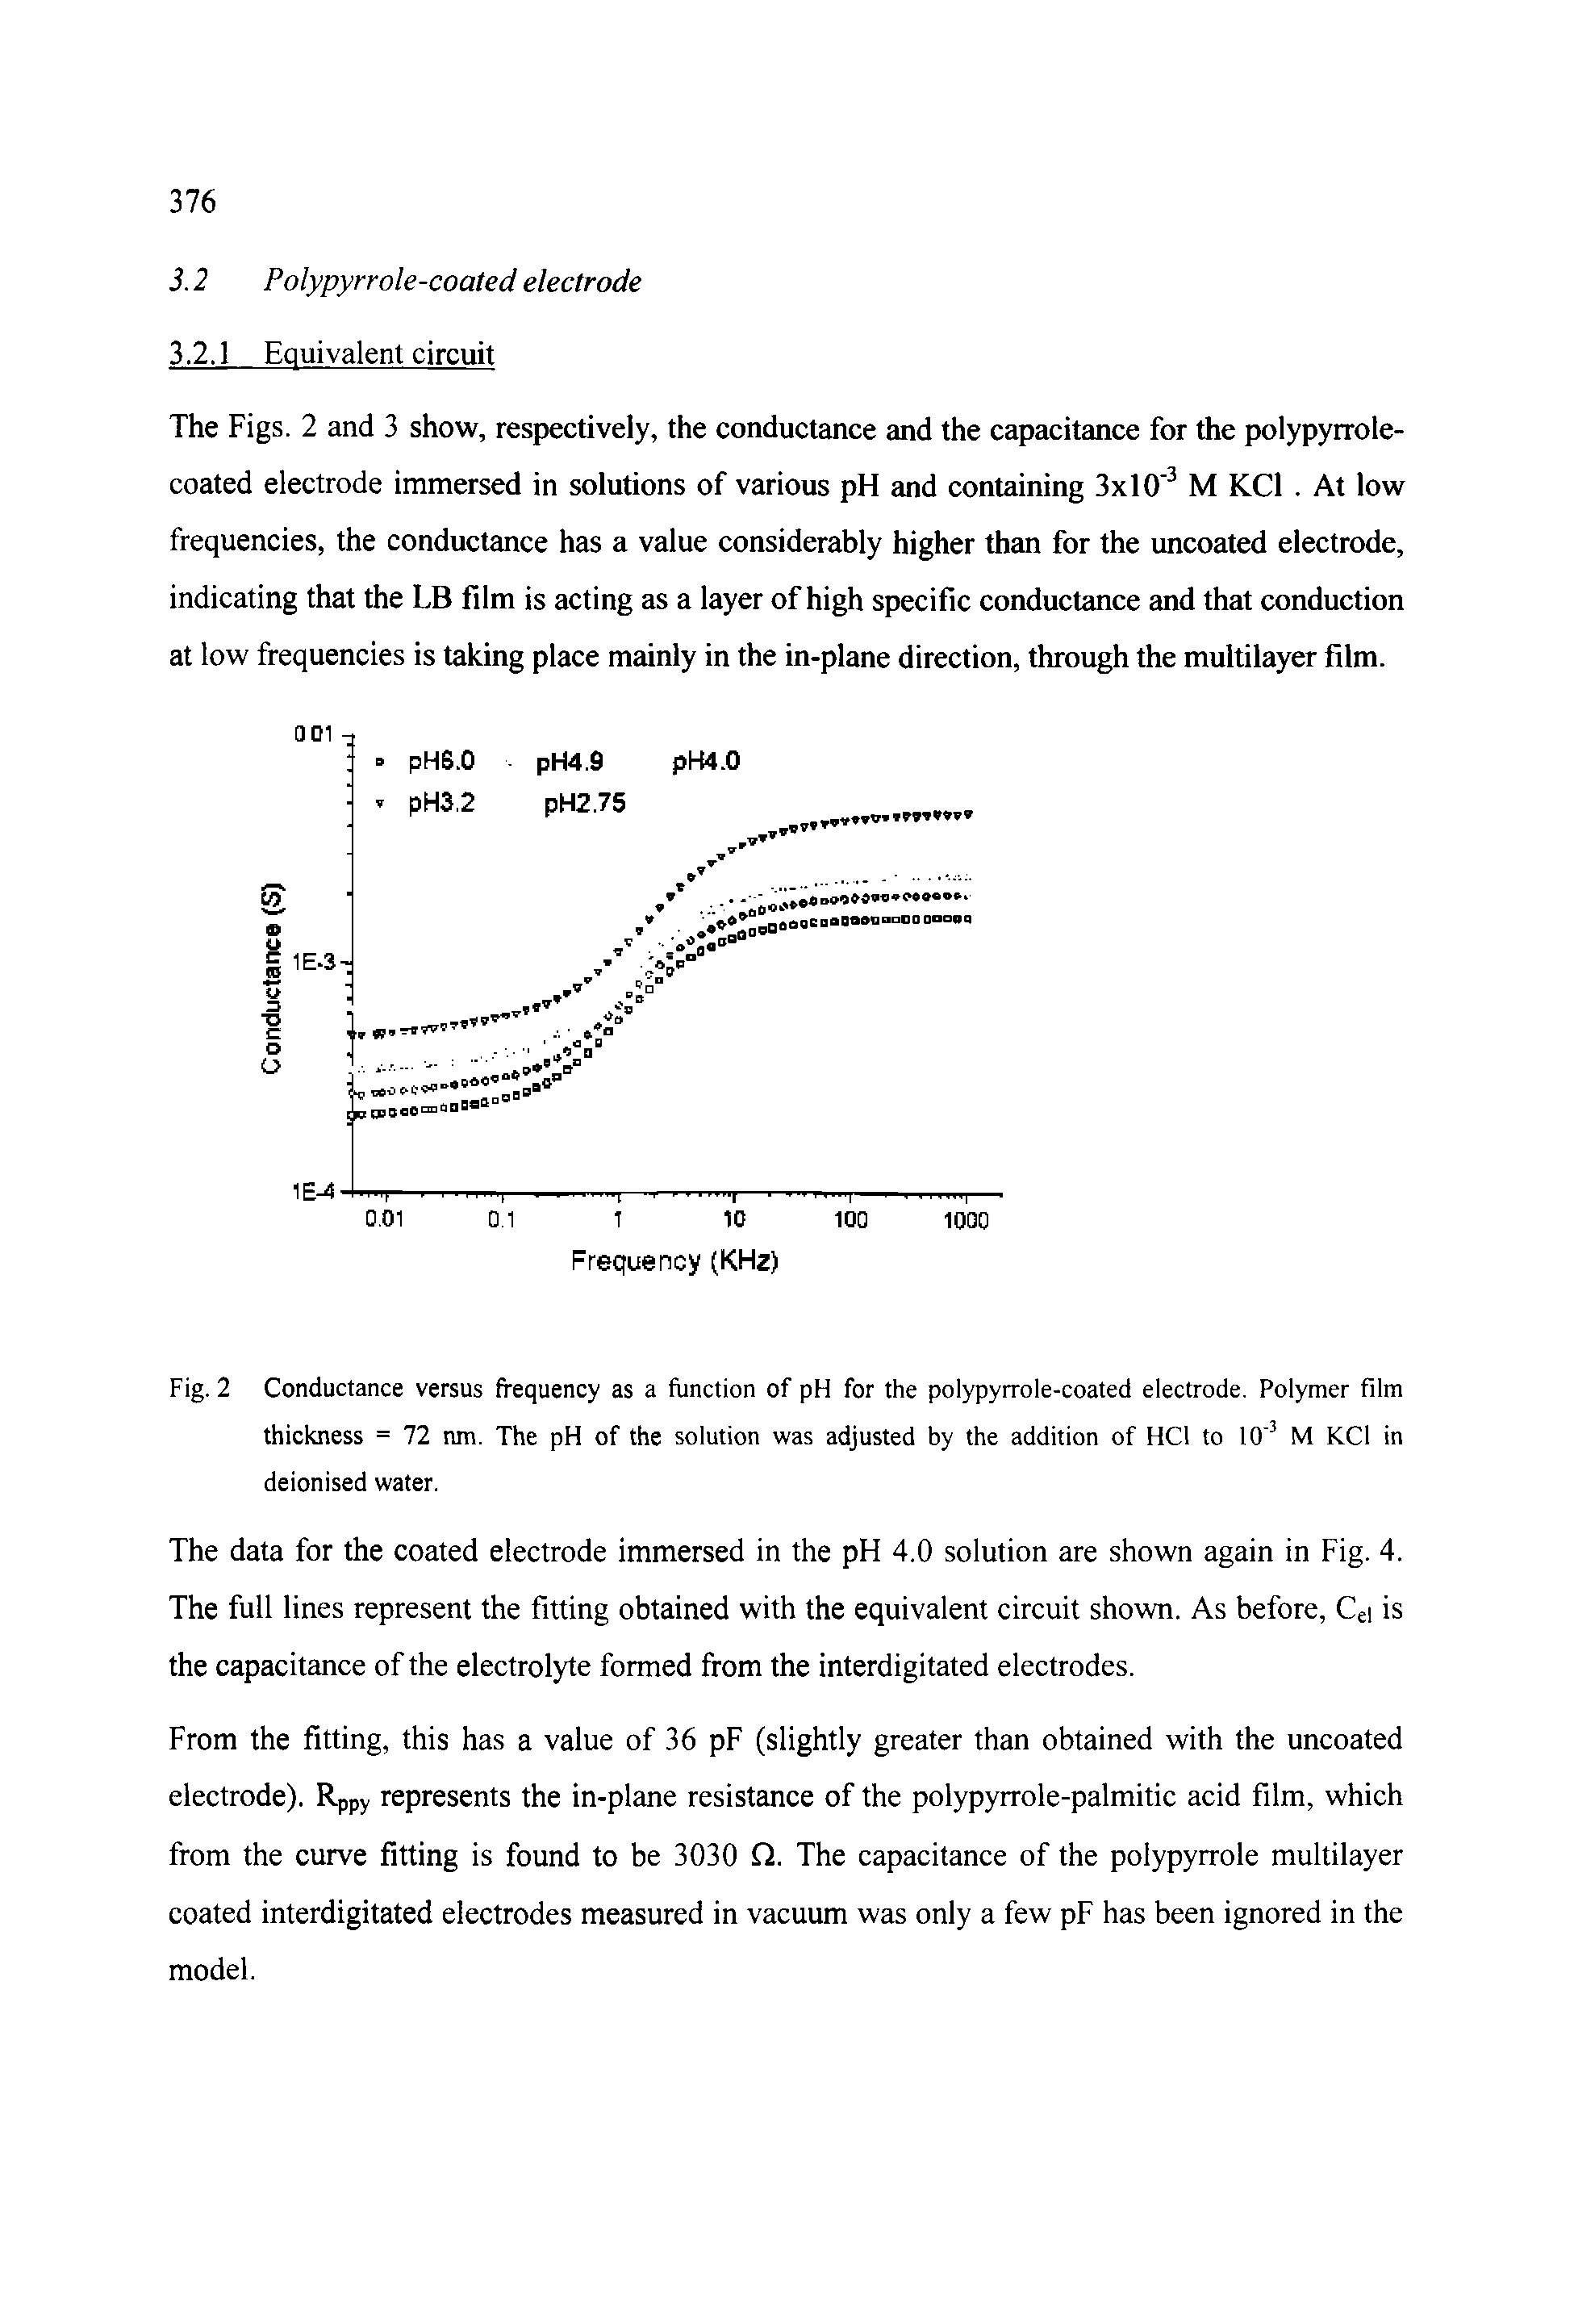 Fig. 2 Conductance versus frequency as a function of pH for the polypyrrole-coated electrode. Polymer film thickness = 72 nm. The pH of the solution was adjusted by the addition of HCl to 10 M KCl in deionised water.